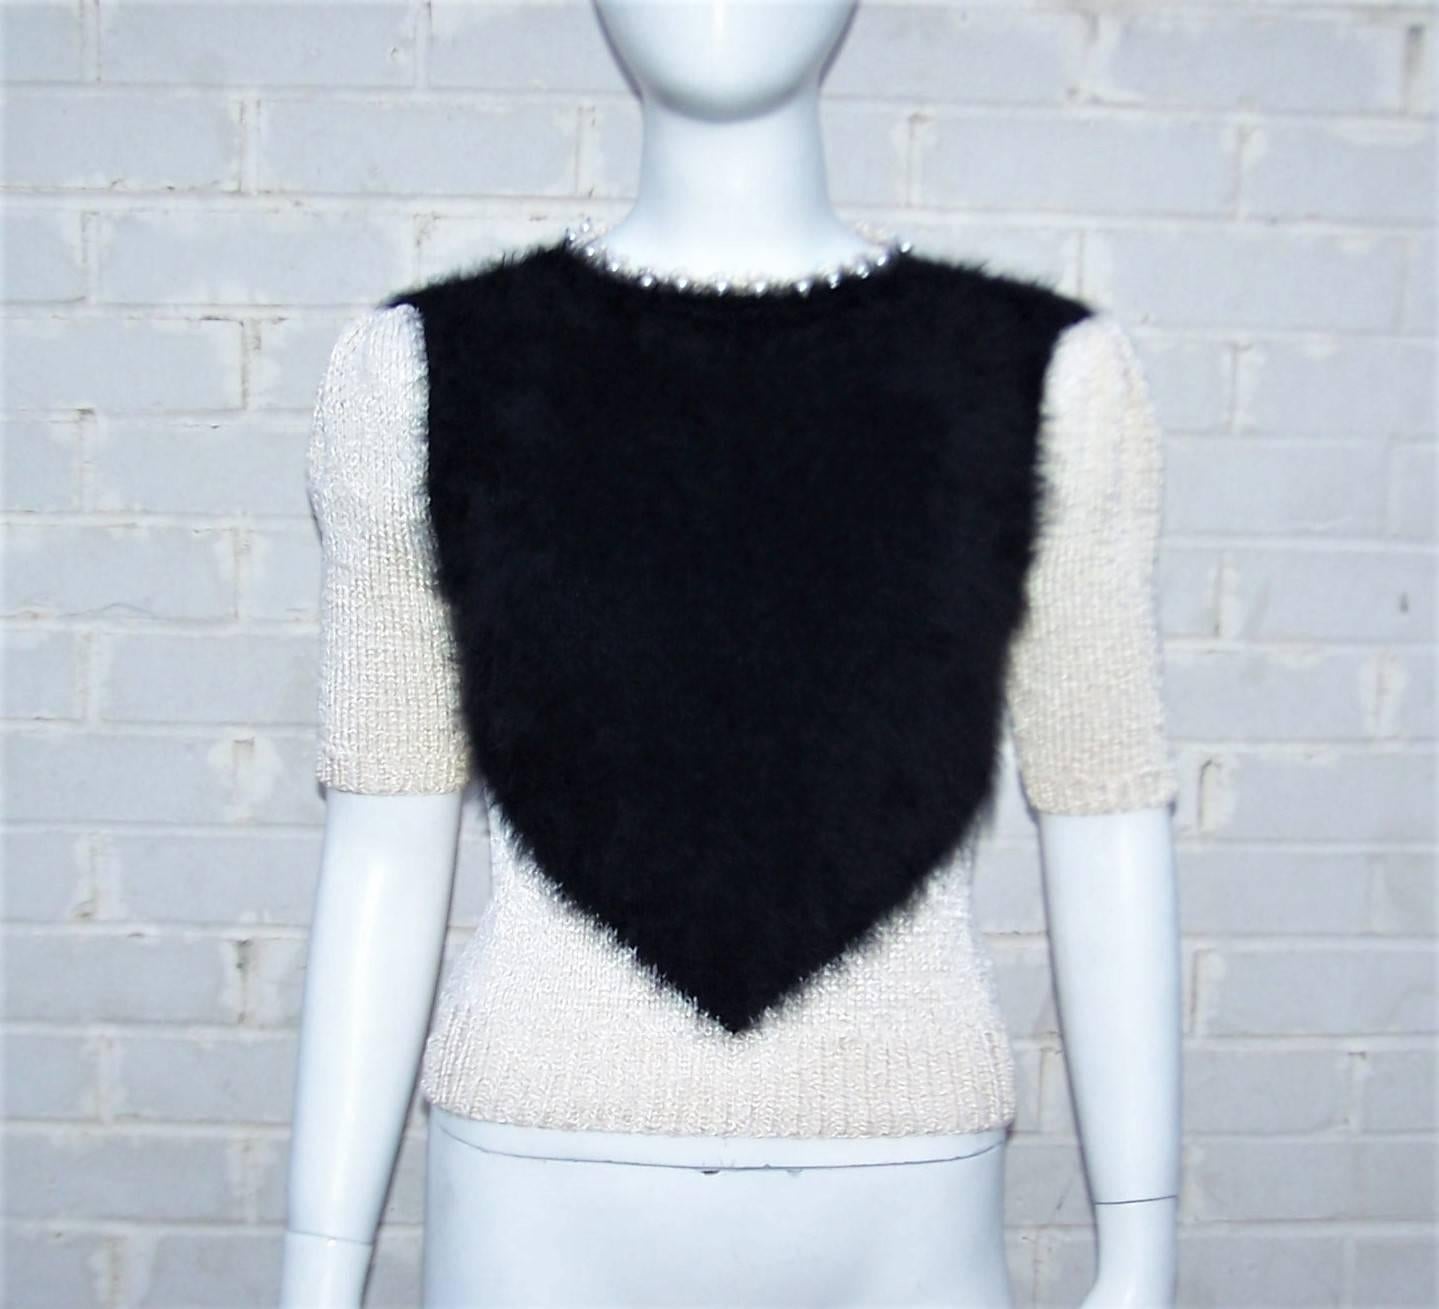 Alas!  The feminine version of a hairy chest!  This adorable glammy sweater top is a great visual combination of graphic black angora offset by pearly iridescent knitwear.  The effect is eye catching and perfect as an alternative top to pair with